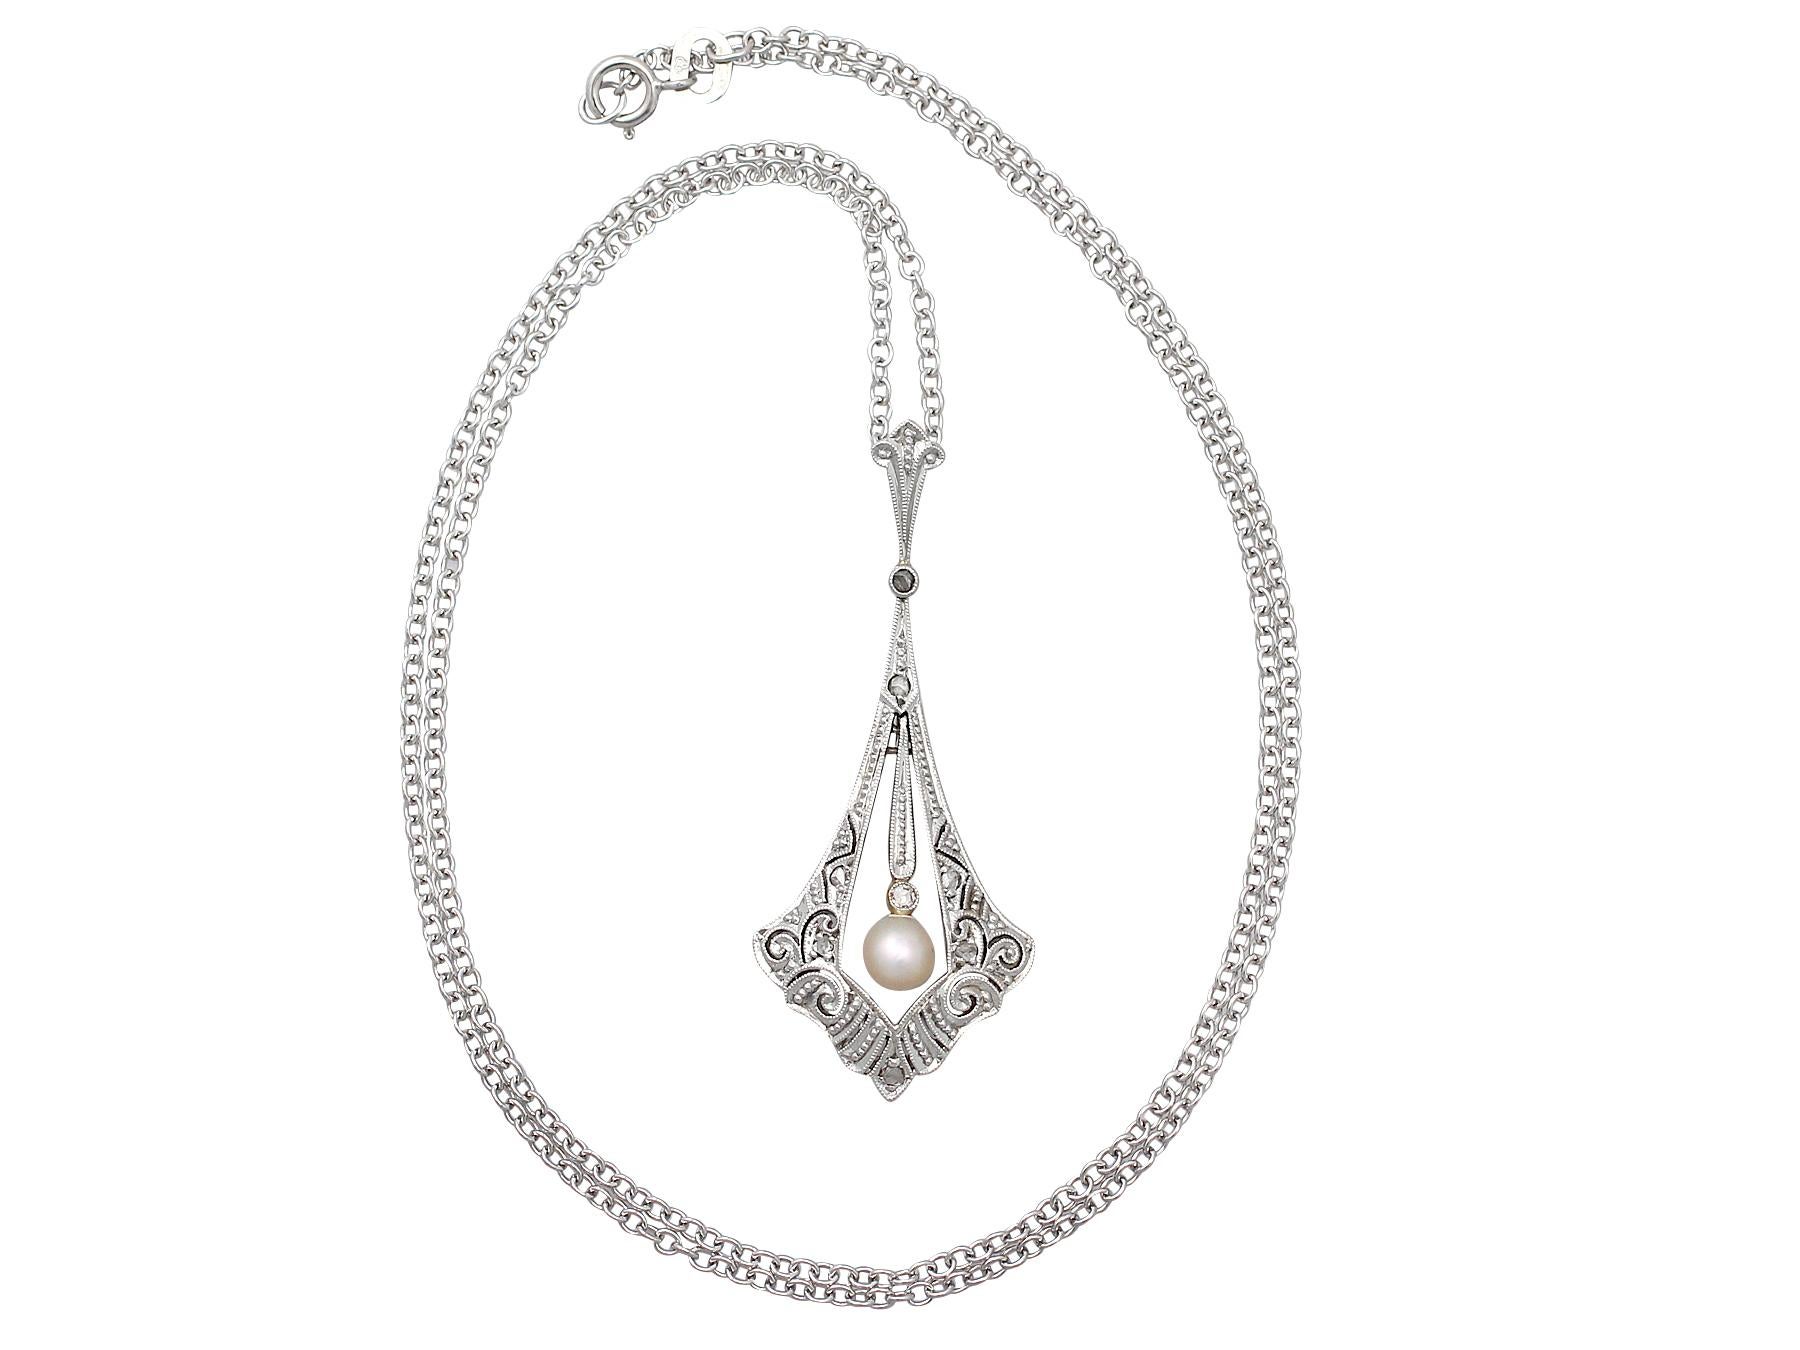 A fine and impressive antique 0.10 carat diamond and pearl 14 karat yellow gold, platinum set pendant; part of our diverse antique diamond jewelry and estate jewelry collections.

This impressive diamond and pearl pendant has been crafted in 14k